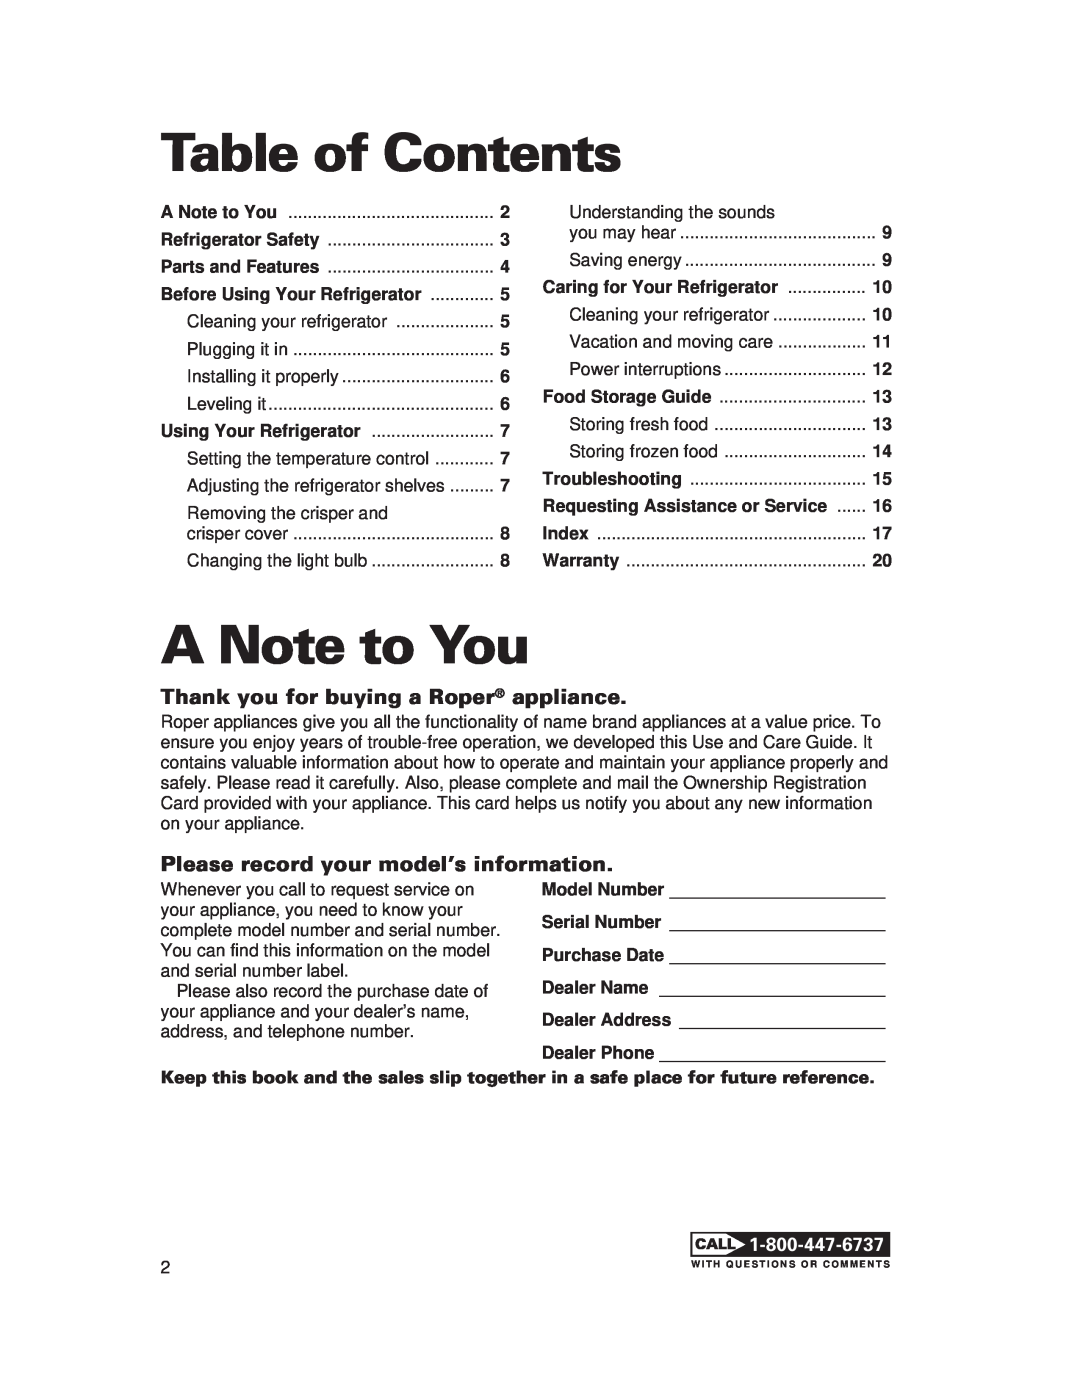 Whirlpool 1-34850/4390527 warranty Table of Contents, A Note to You, Thank you for buying a Roper appliance 